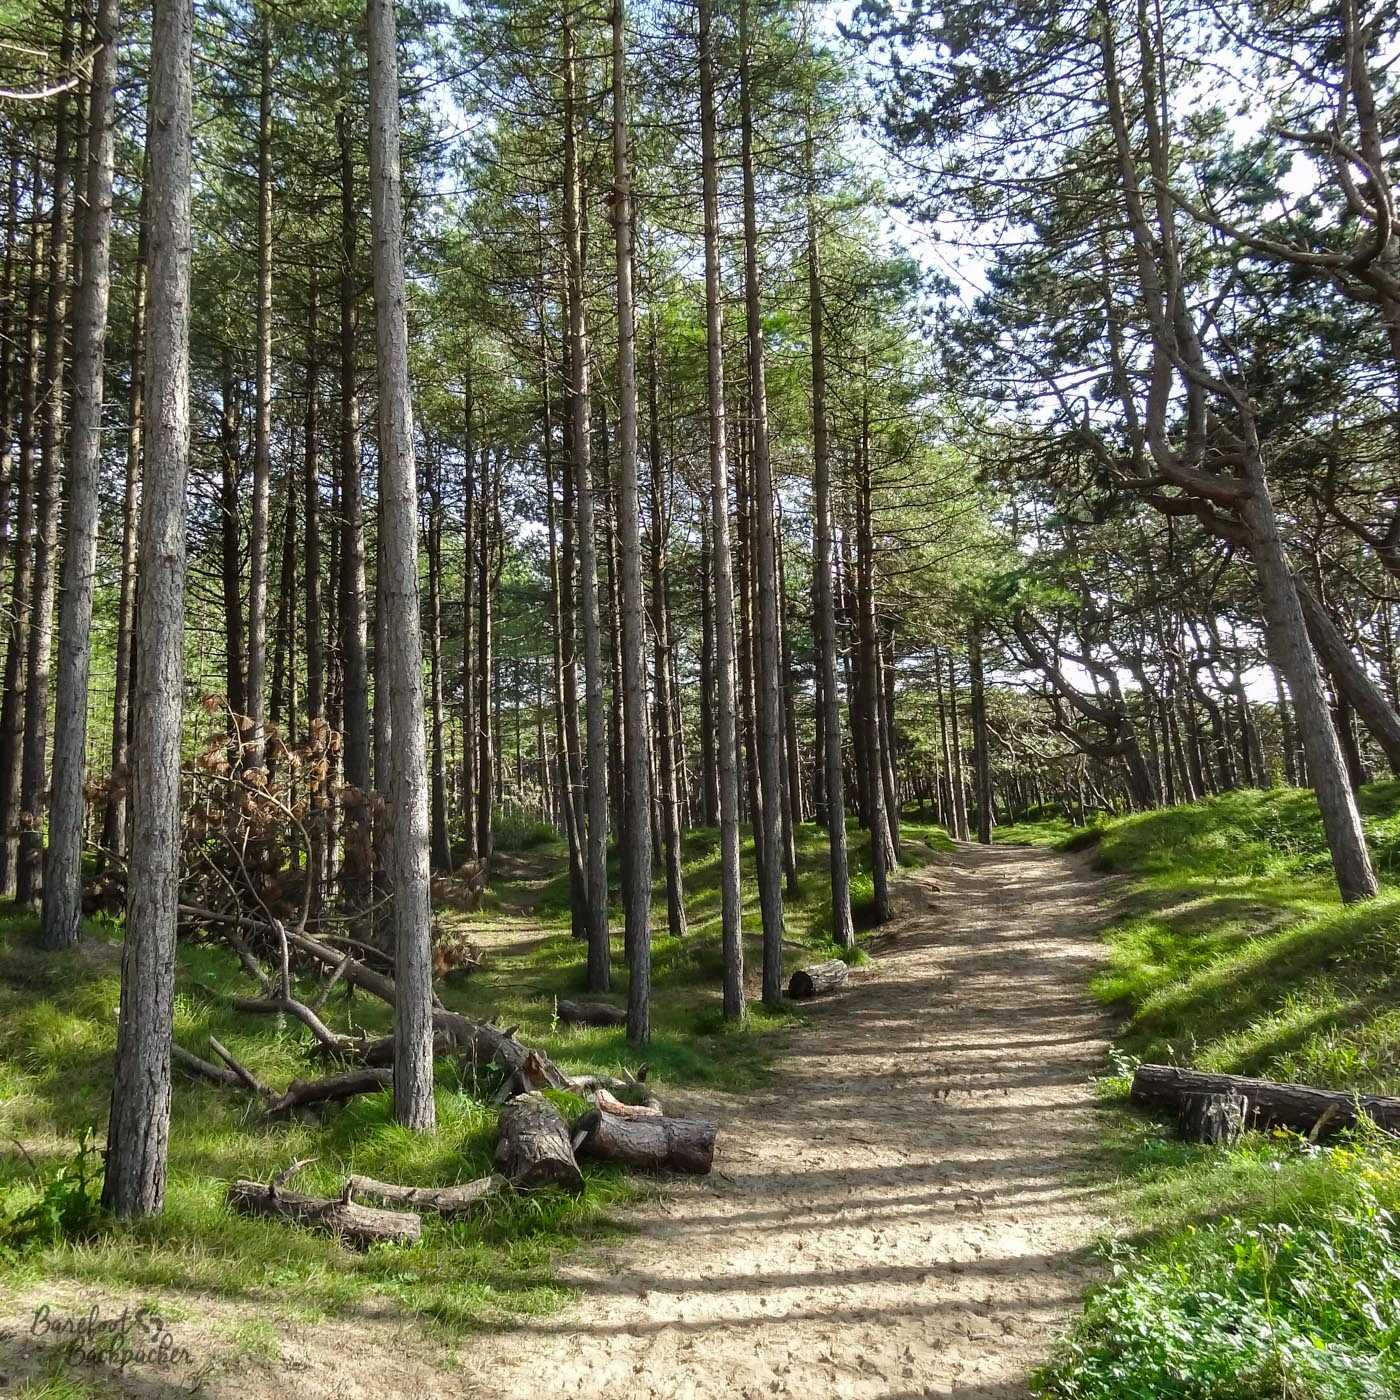 A sandy path goes into the distance (slightly rising to a ridge), while pine trees cover the grass on either side, and stretch up beyond the top of the image. More pine trees are visible in the background – although the sky is bright and the lower trunks have few branches on them making it quite an airy space, this is very definitely deep in the woods.